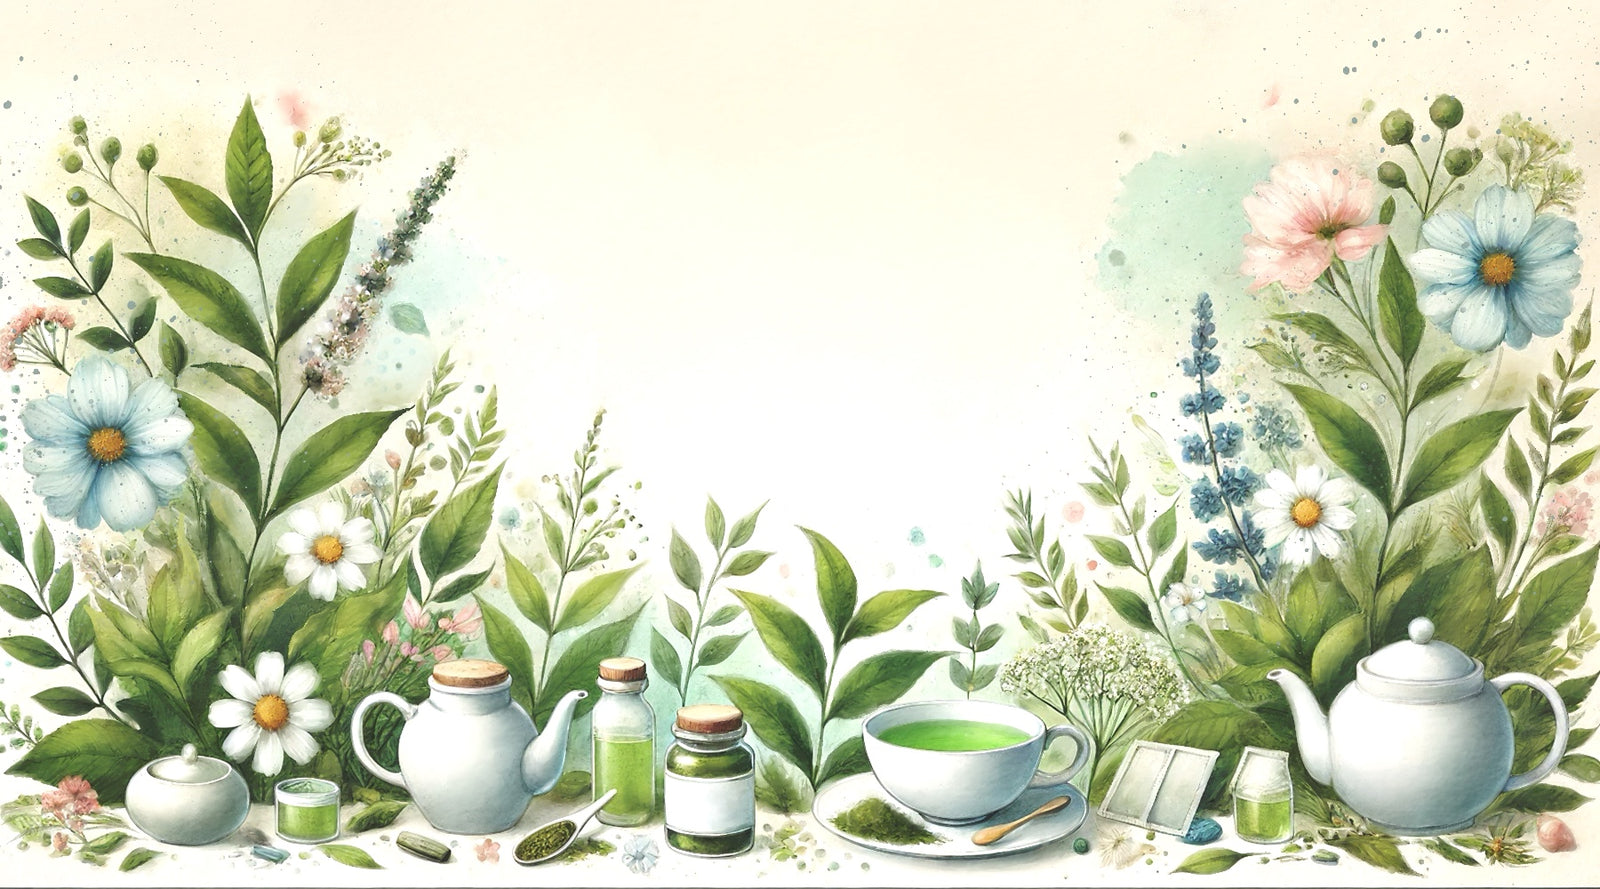 The Natural Health Market, A water colour image displaying herbal tea making and green broad leafed plants.